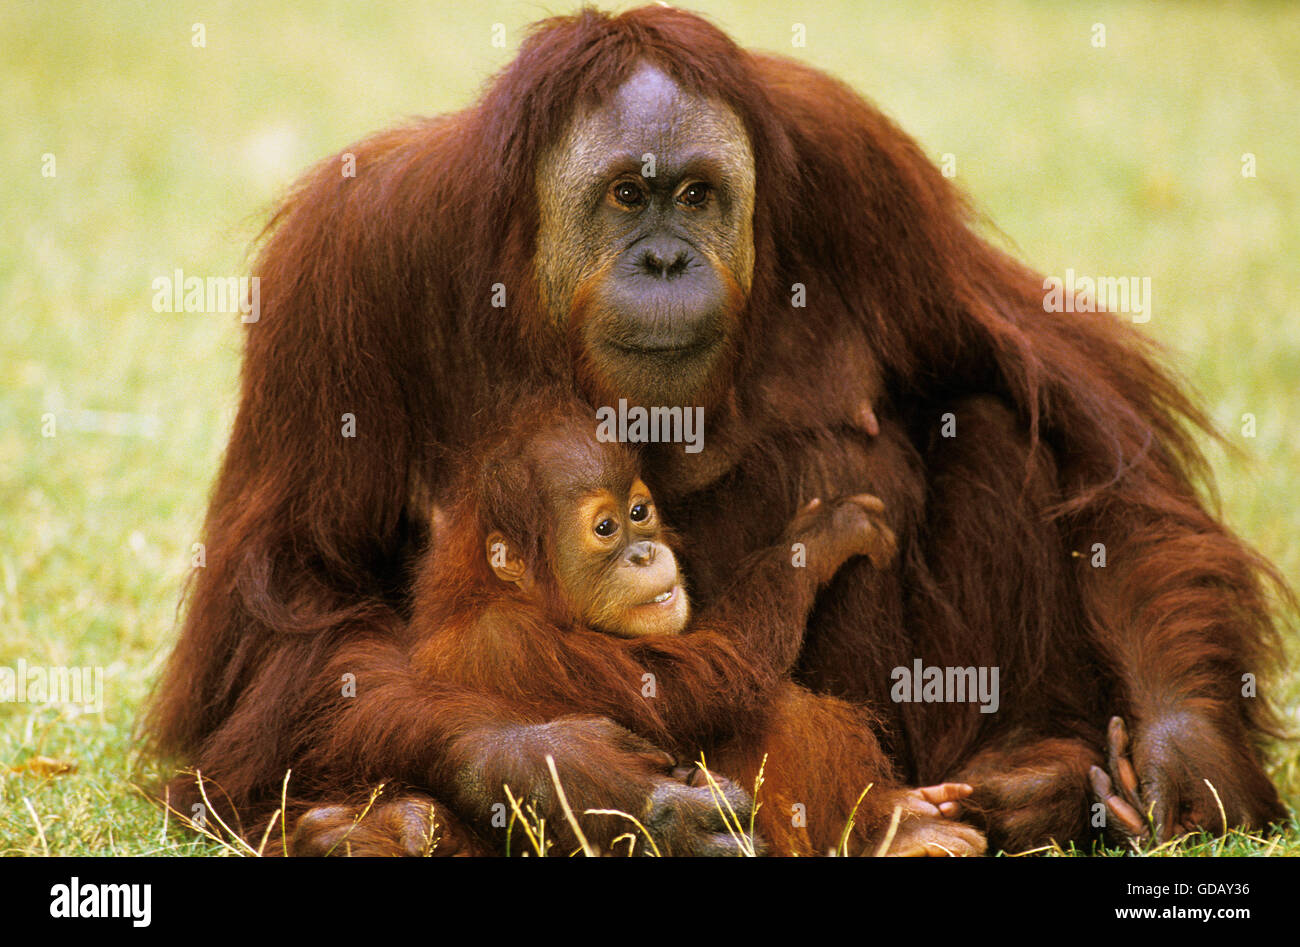 L'orang-outan, pongo pygmaeus MOTHER WITH BABY SITTING ON GRASS Banque D'Images